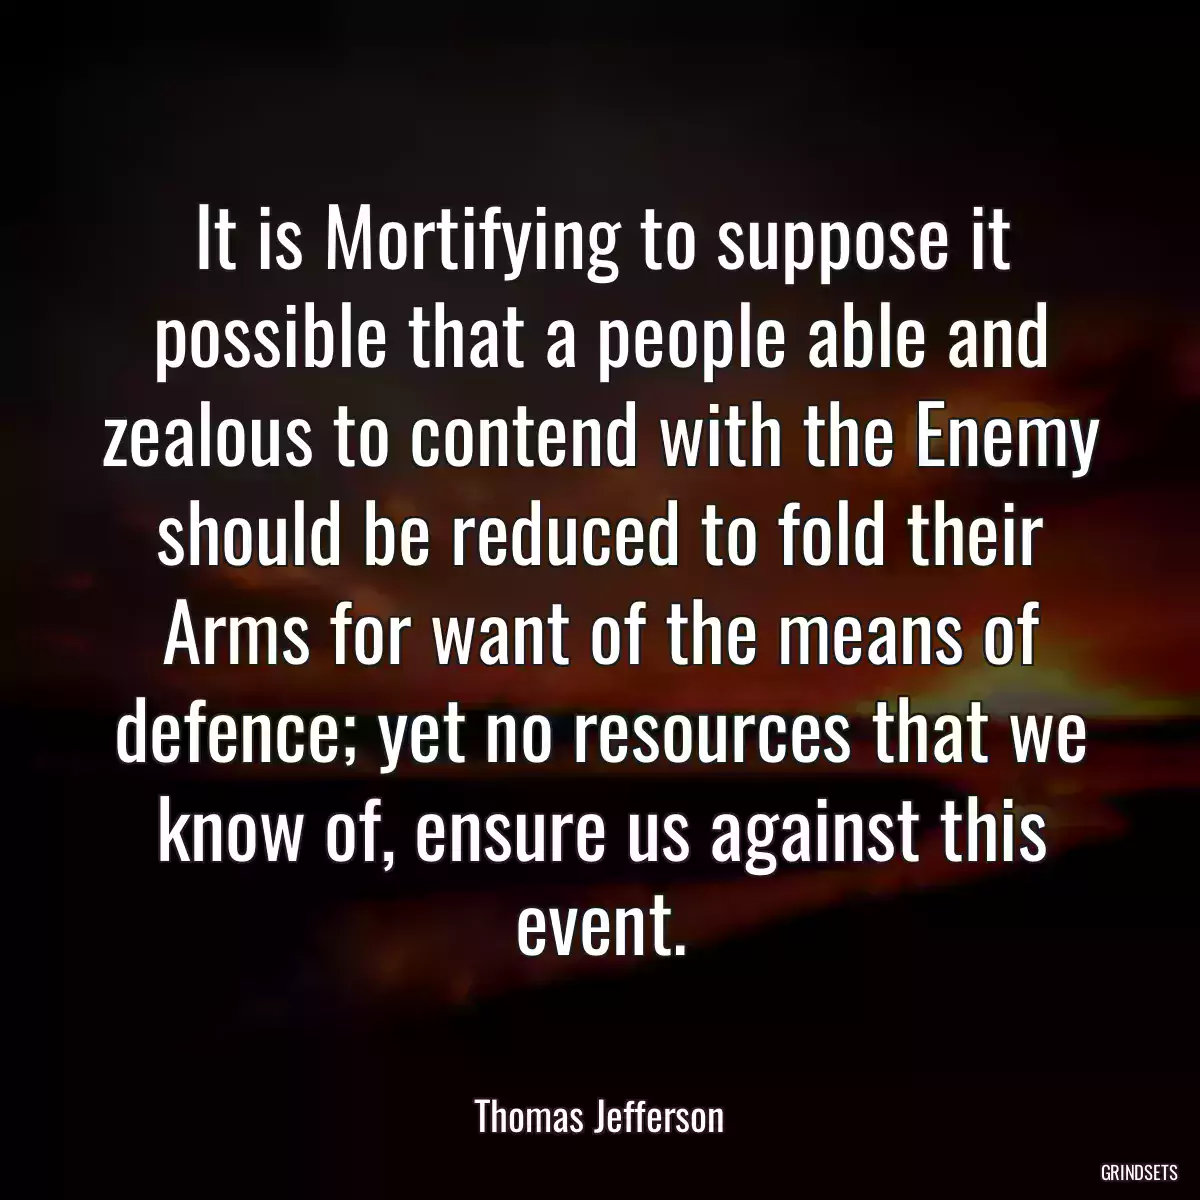 It is Mortifying to suppose it possible that a people able and zealous to contend with the Enemy should be reduced to fold their Arms for want of the means of defence; yet no resources that we know of, ensure us against this event.